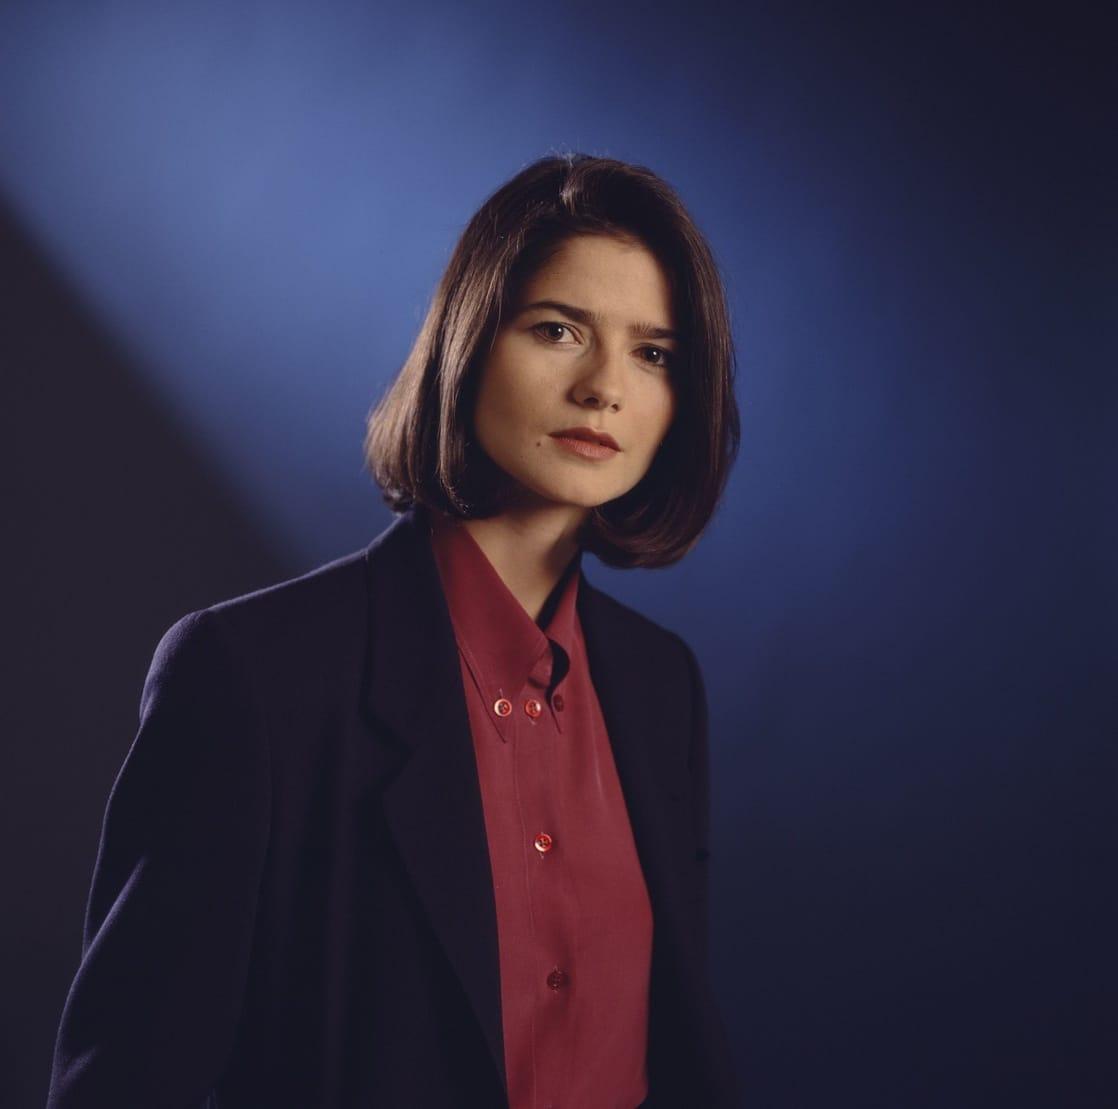 55+ Hot Pictures Of Jill Hennessy Which Are Sure to Catch Your Attention | Best Of Comic Books